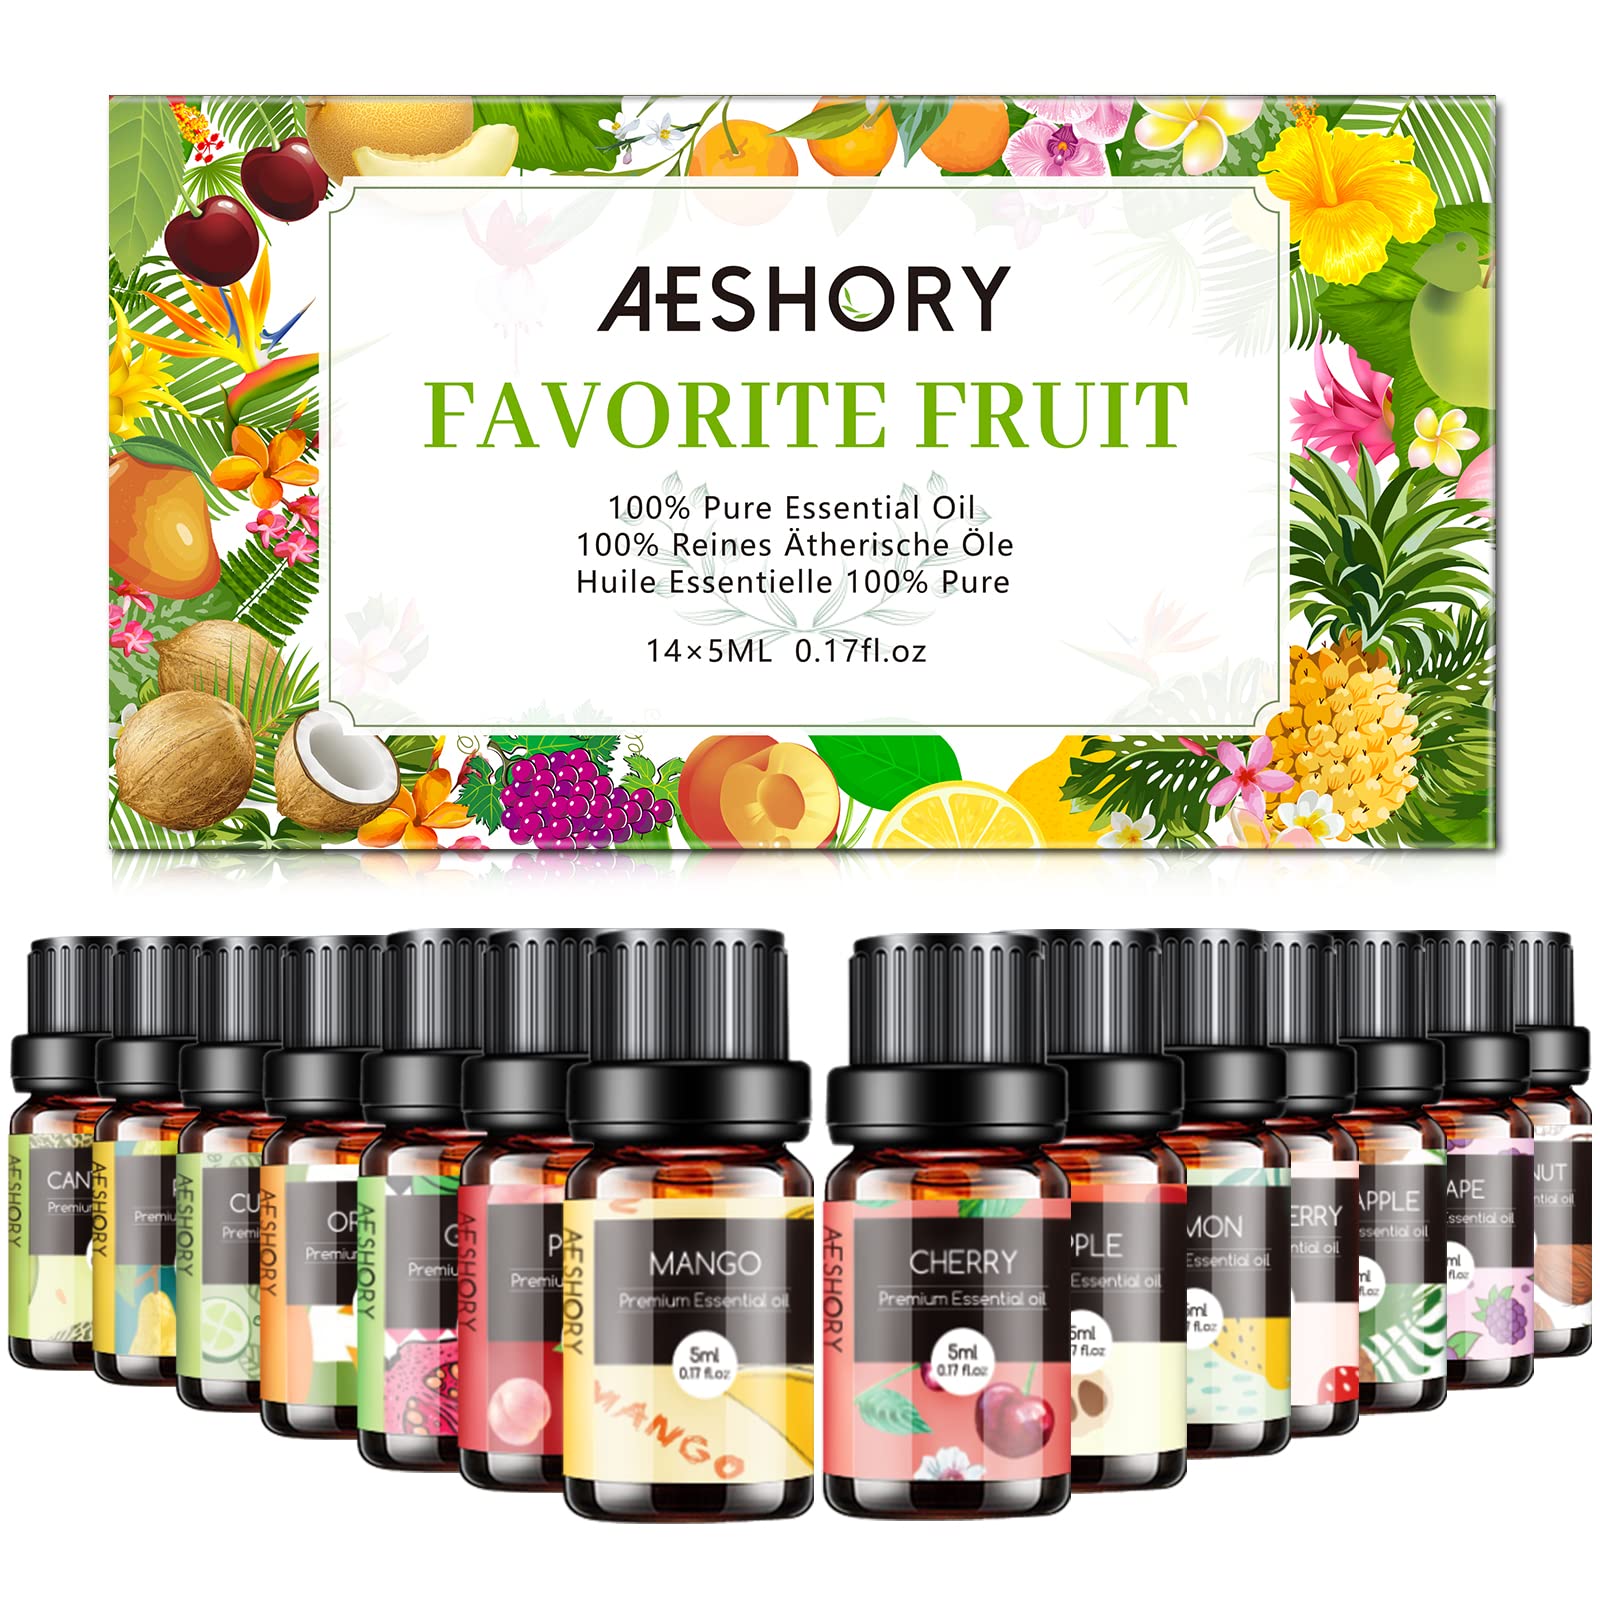 Fruity Fruits Good Essential Fragrance Oil Set (Pack of 10) 5ml Set Includes Strawberry, Apple, Watermelon, Pineapple, Cucumber Melon, Red Cherry, Ma